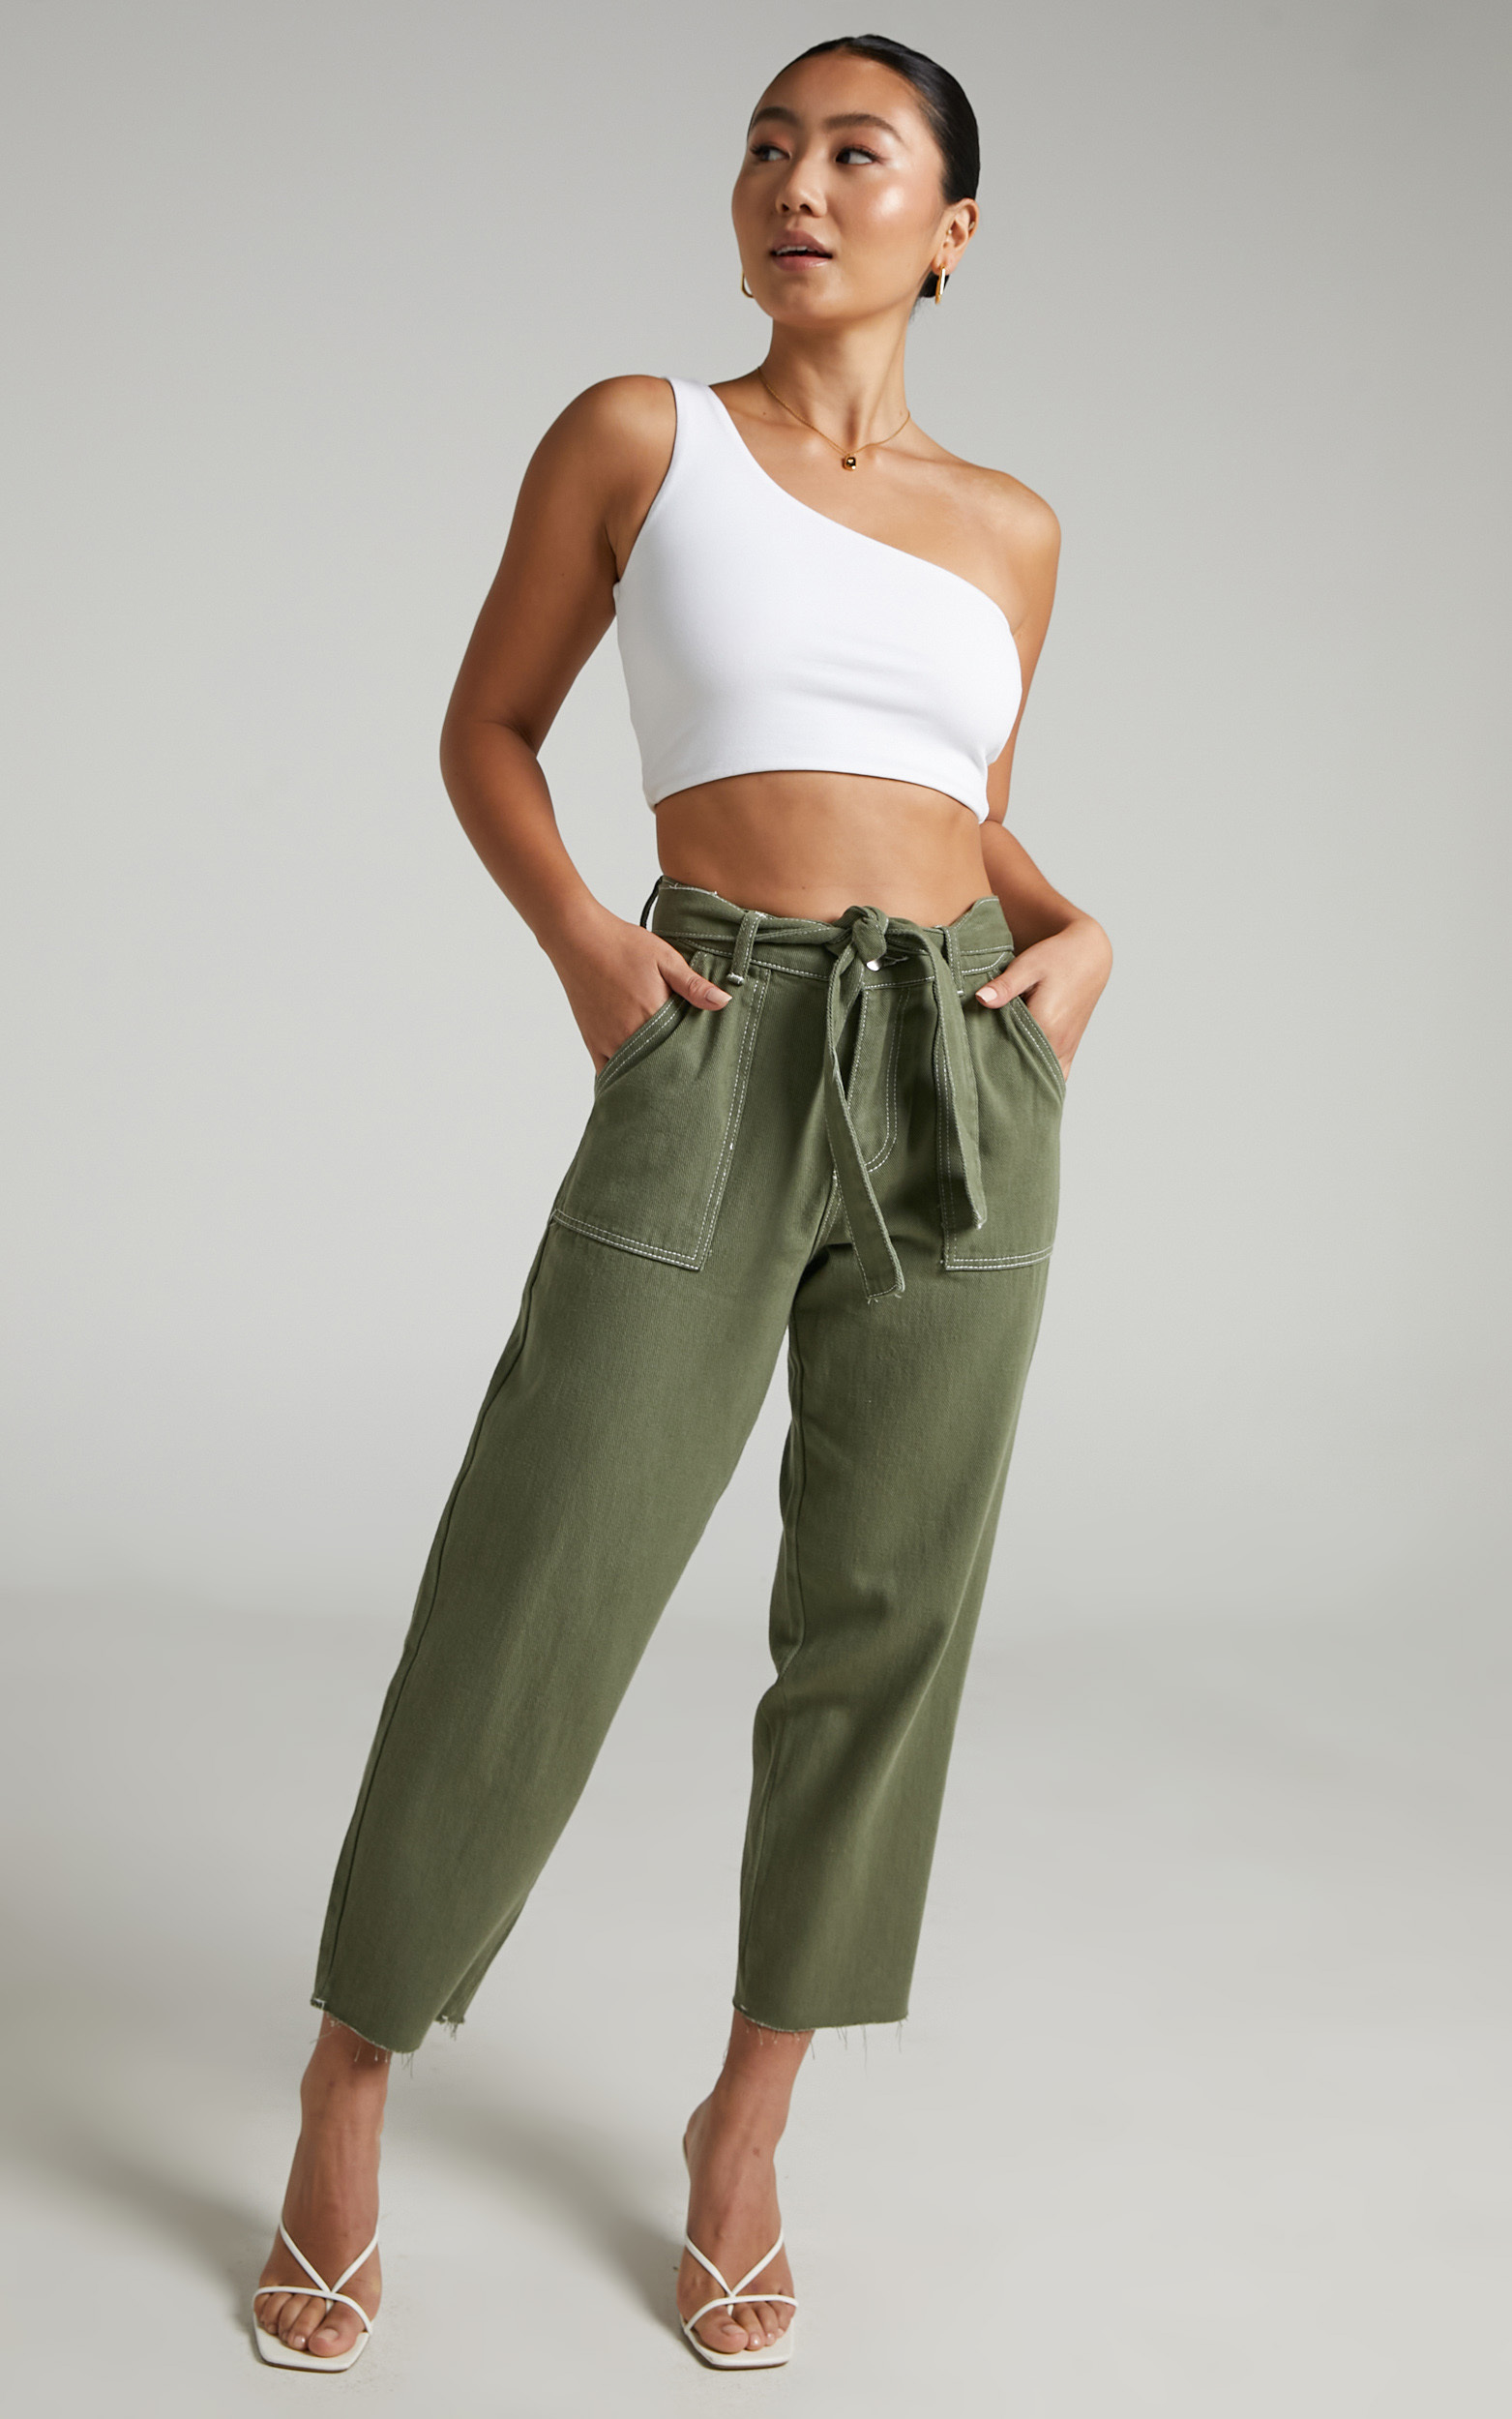 Leyton Tie Waist Jeans in Khaki - 06, GRN1, hi-res image number null